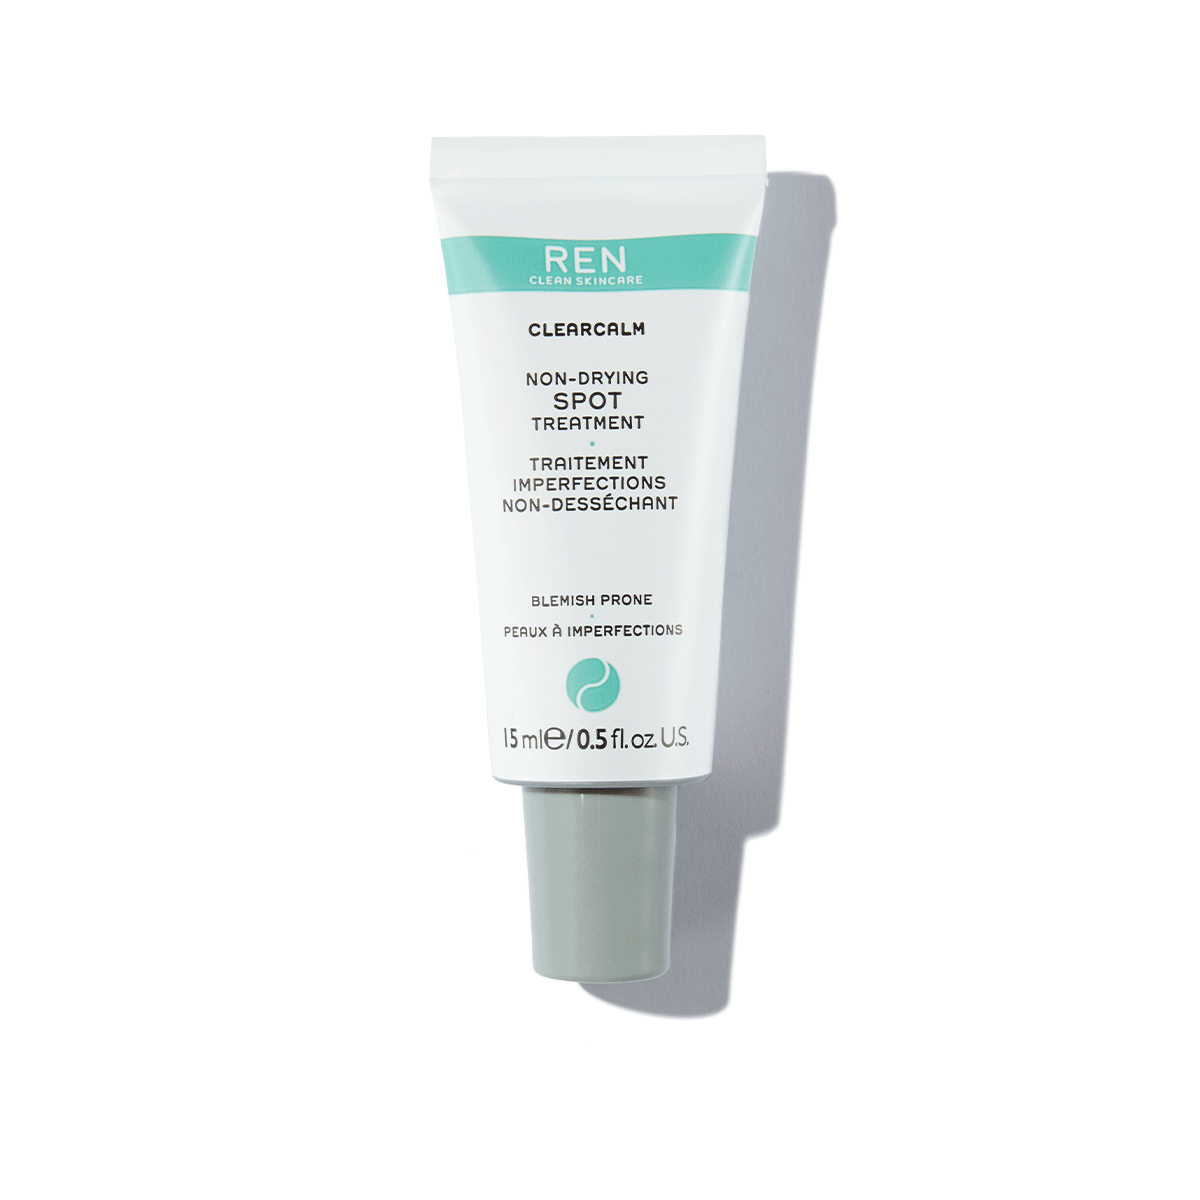 ren-clean-skincare-clearcalm-non-drying-spot-treatment-29219359031338.png